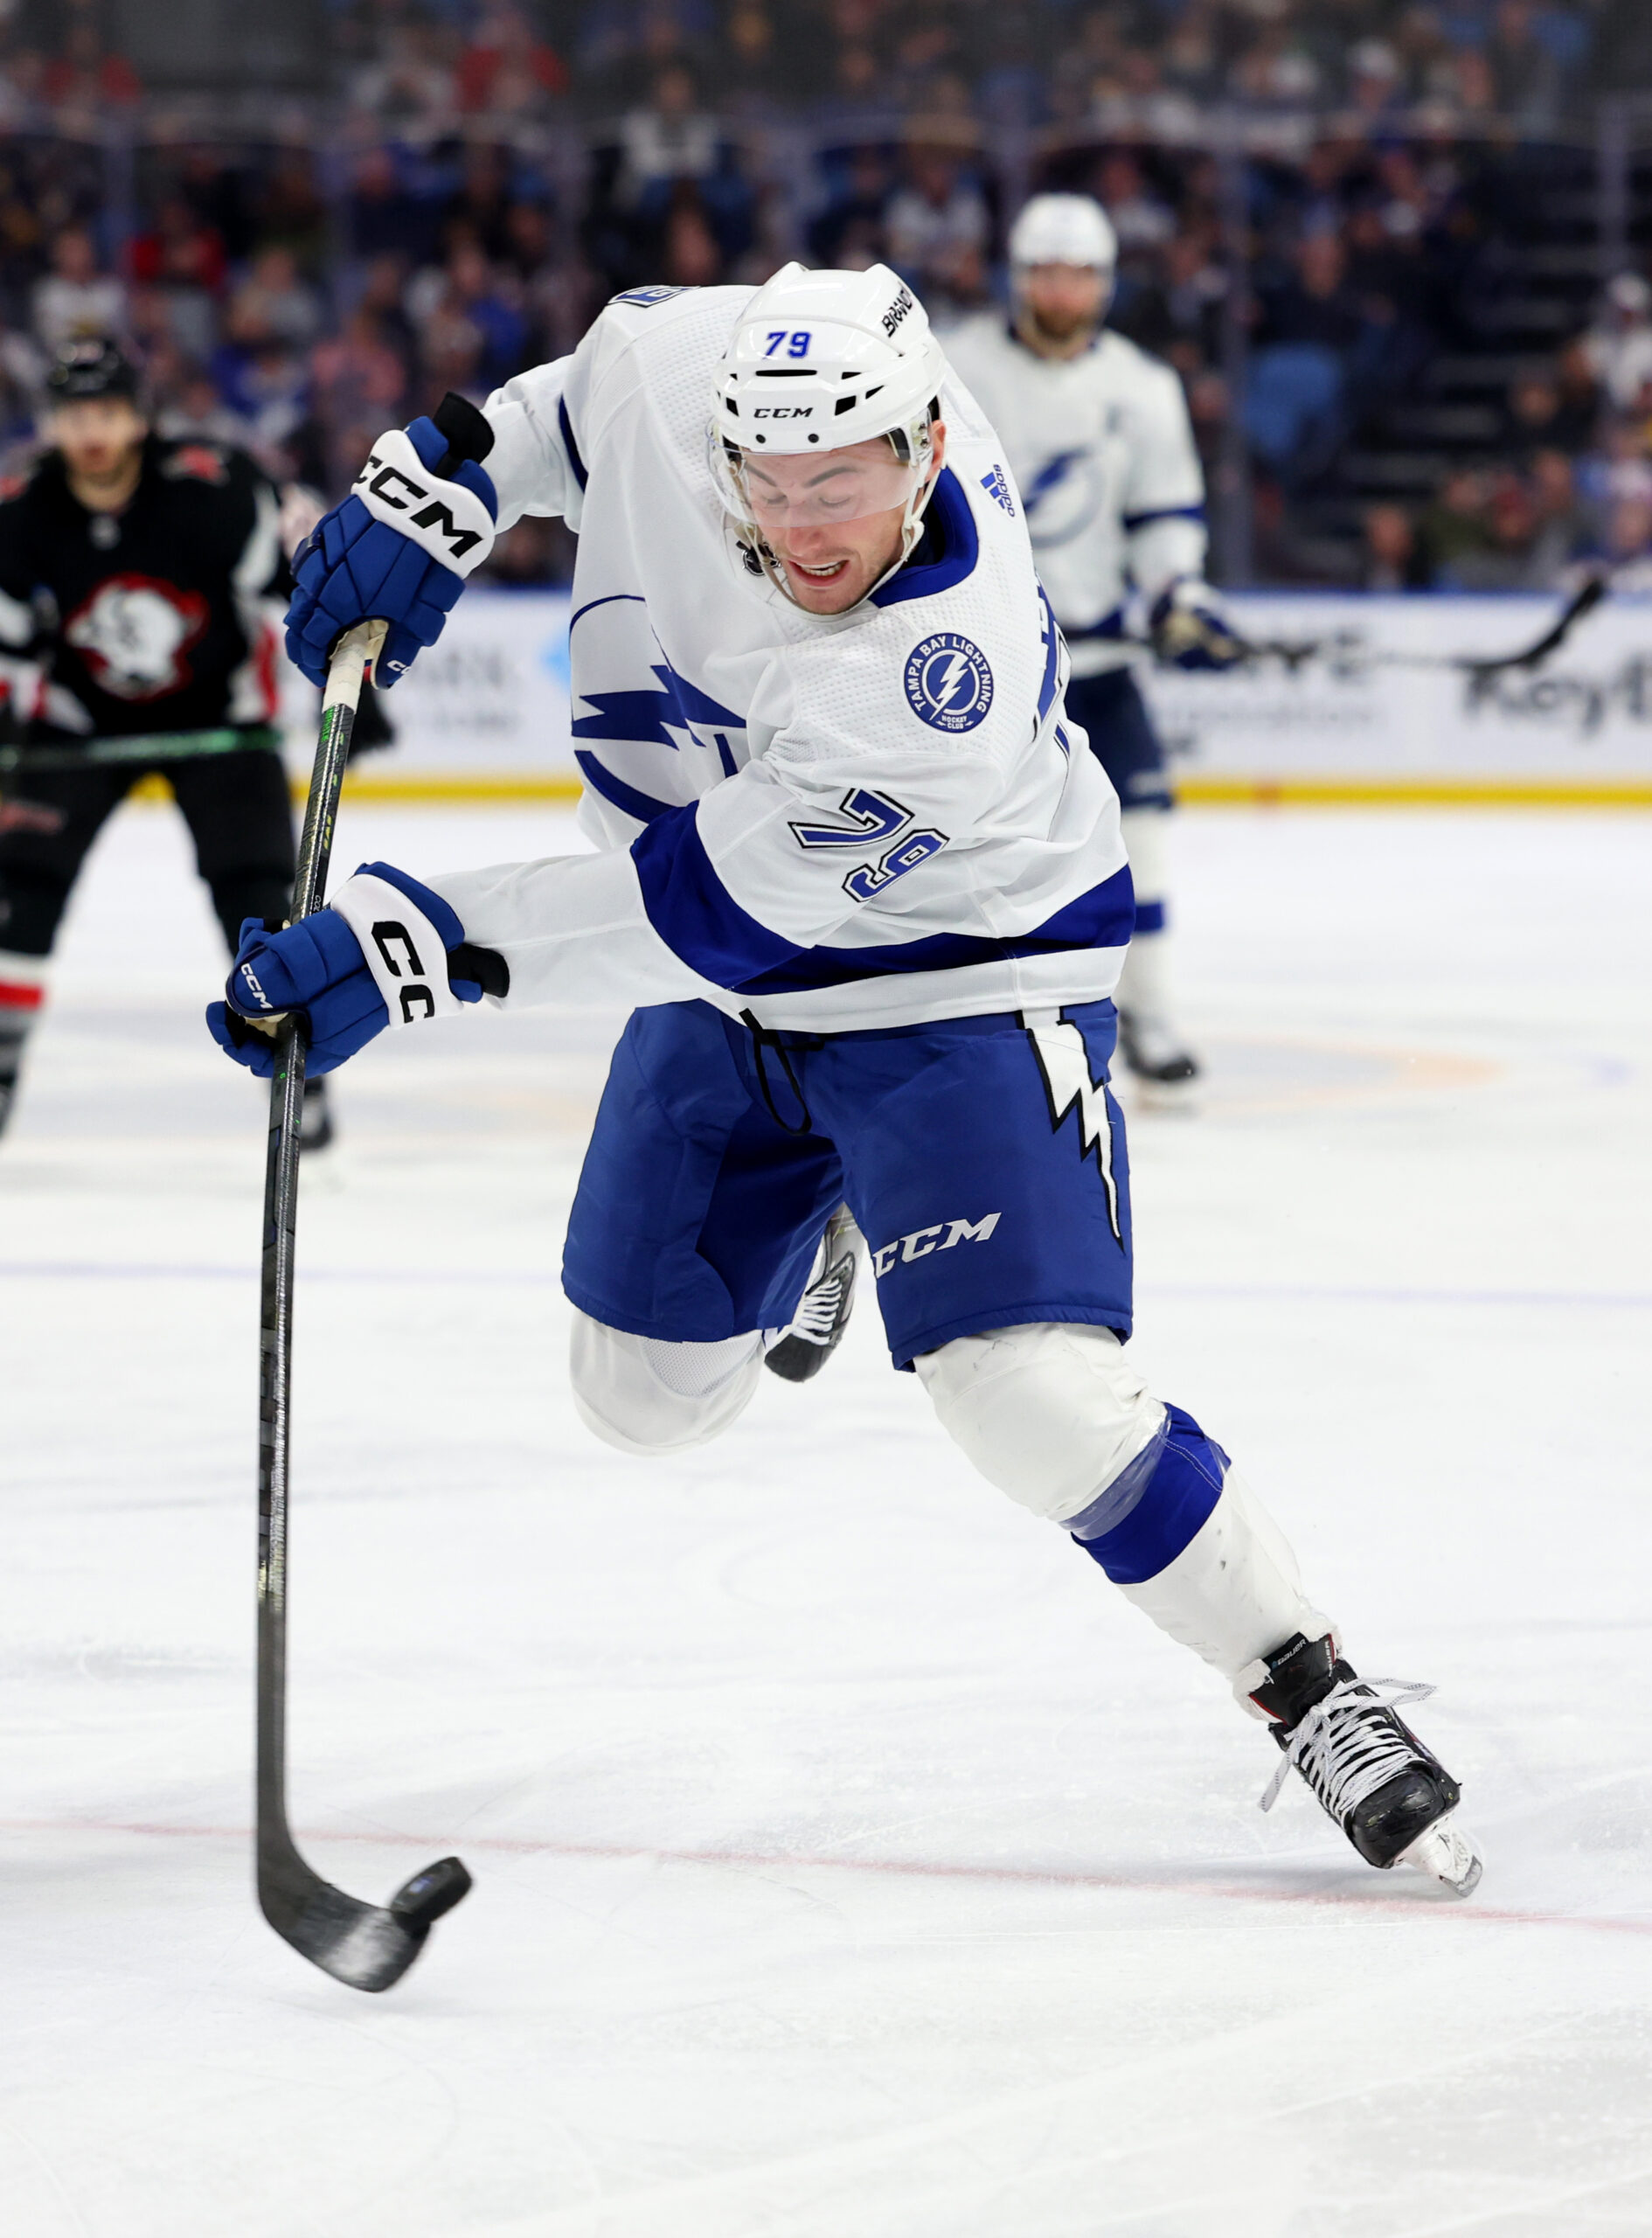 Lightning trading forward Ross Colton to Avalanche